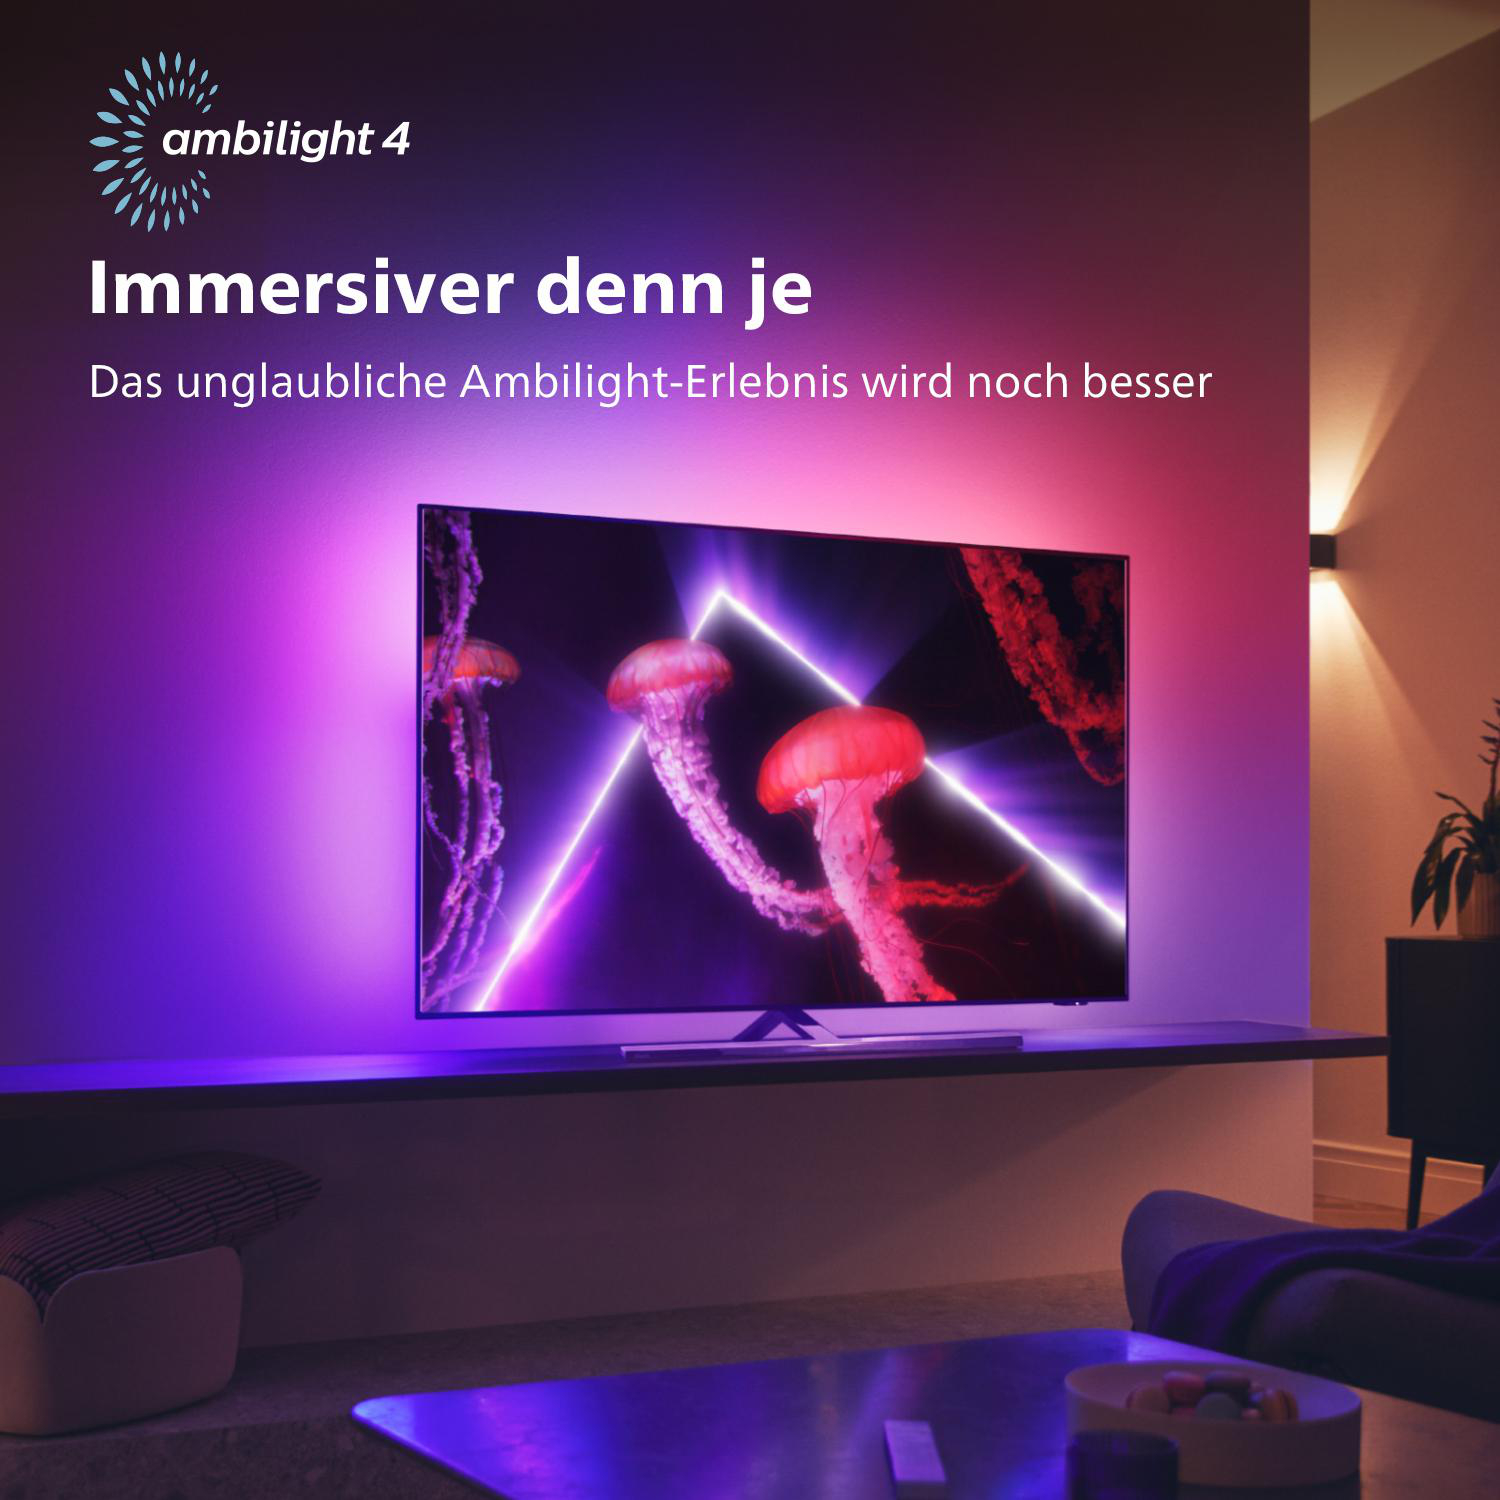 194 OLED (R)) SMART 11 Ambilight, cm, UHD / TV™ PHILIPS 77OLED807/12 Fernseher 77 4K, TV, Zoll Android (Flat,